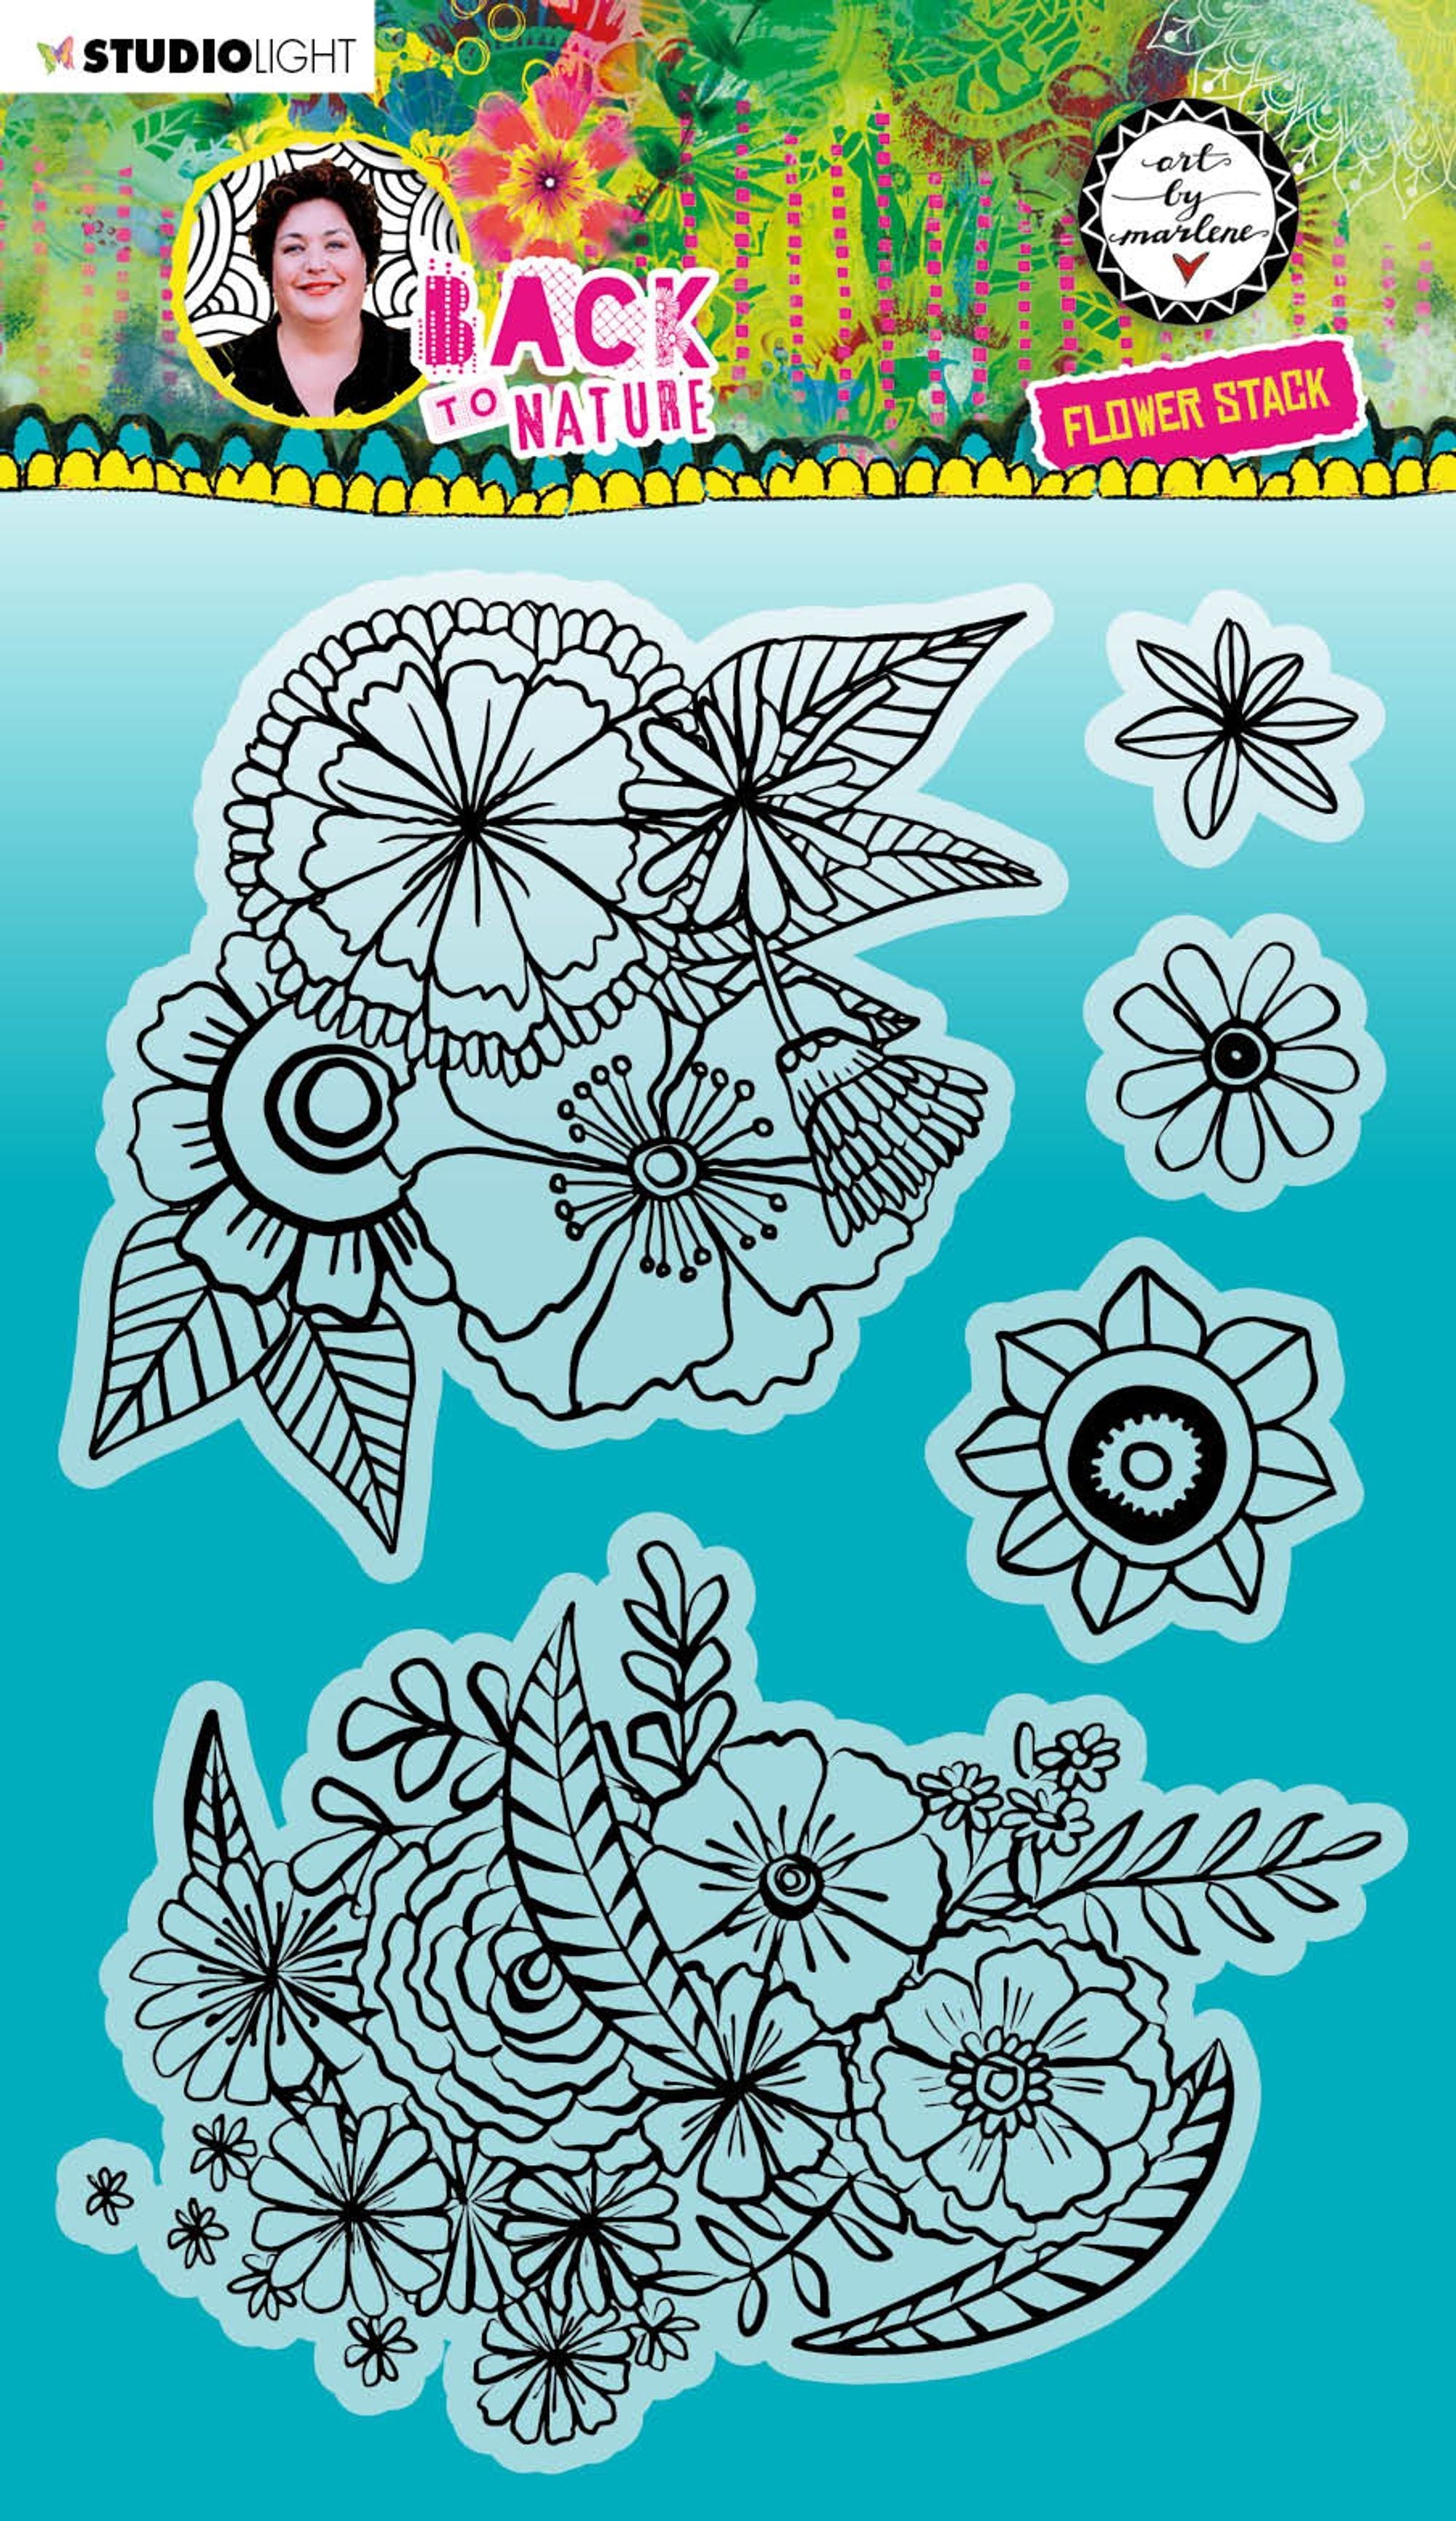 ABM Clear Stamp Flower Stack Back To Nature 148x210x3mm 5 PC nr.146